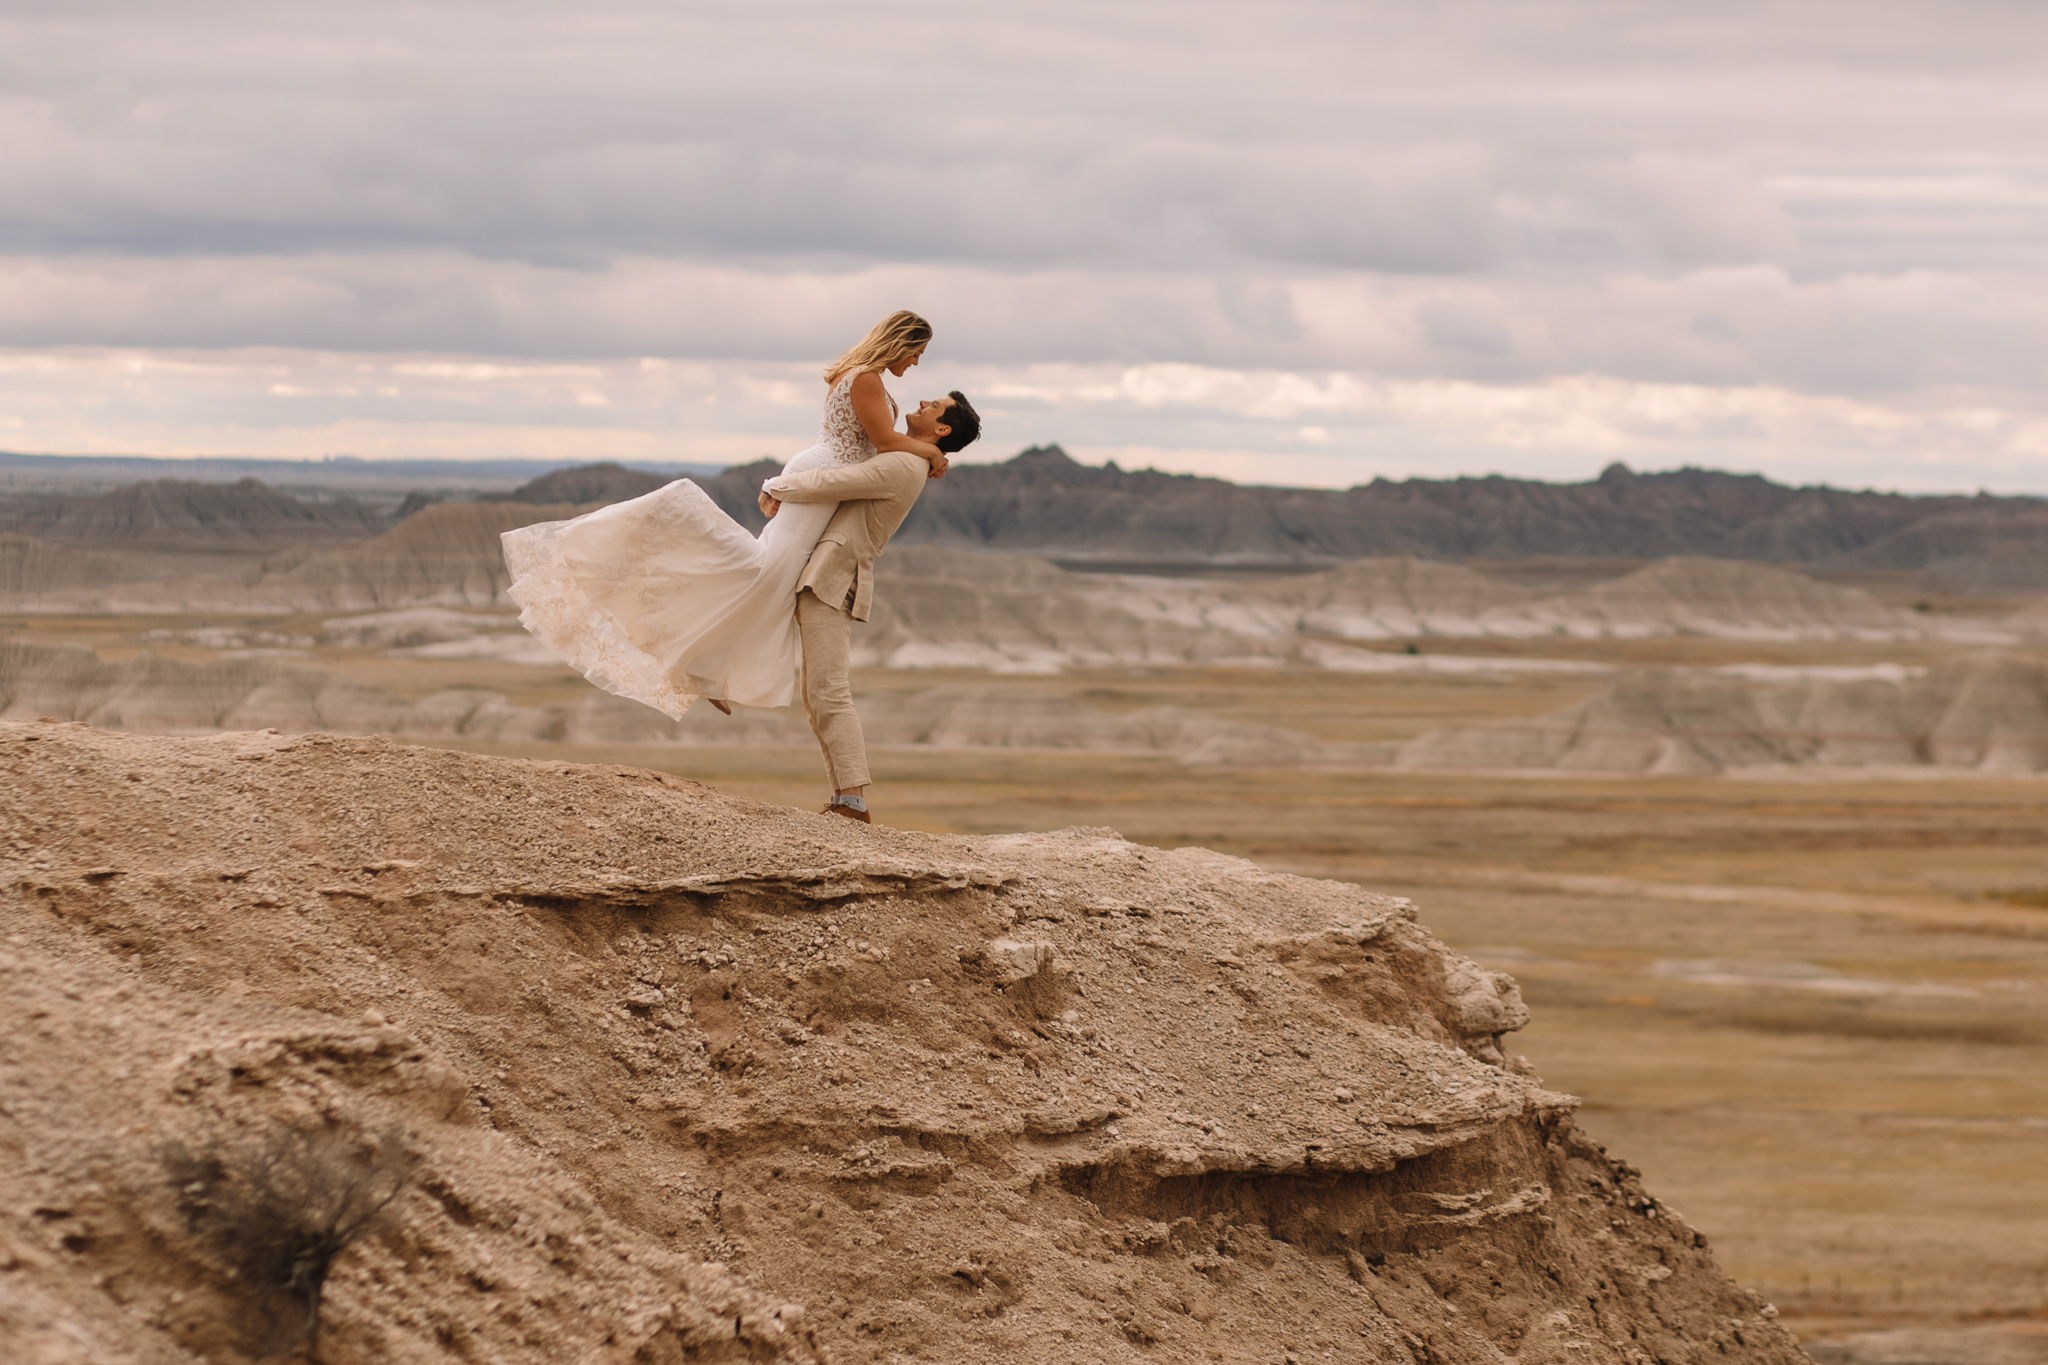 Groom picking up his bride from below her butt as she kicks her legs up and down and her dress is flowing in the wind. The South Dakota badlands are visible around them